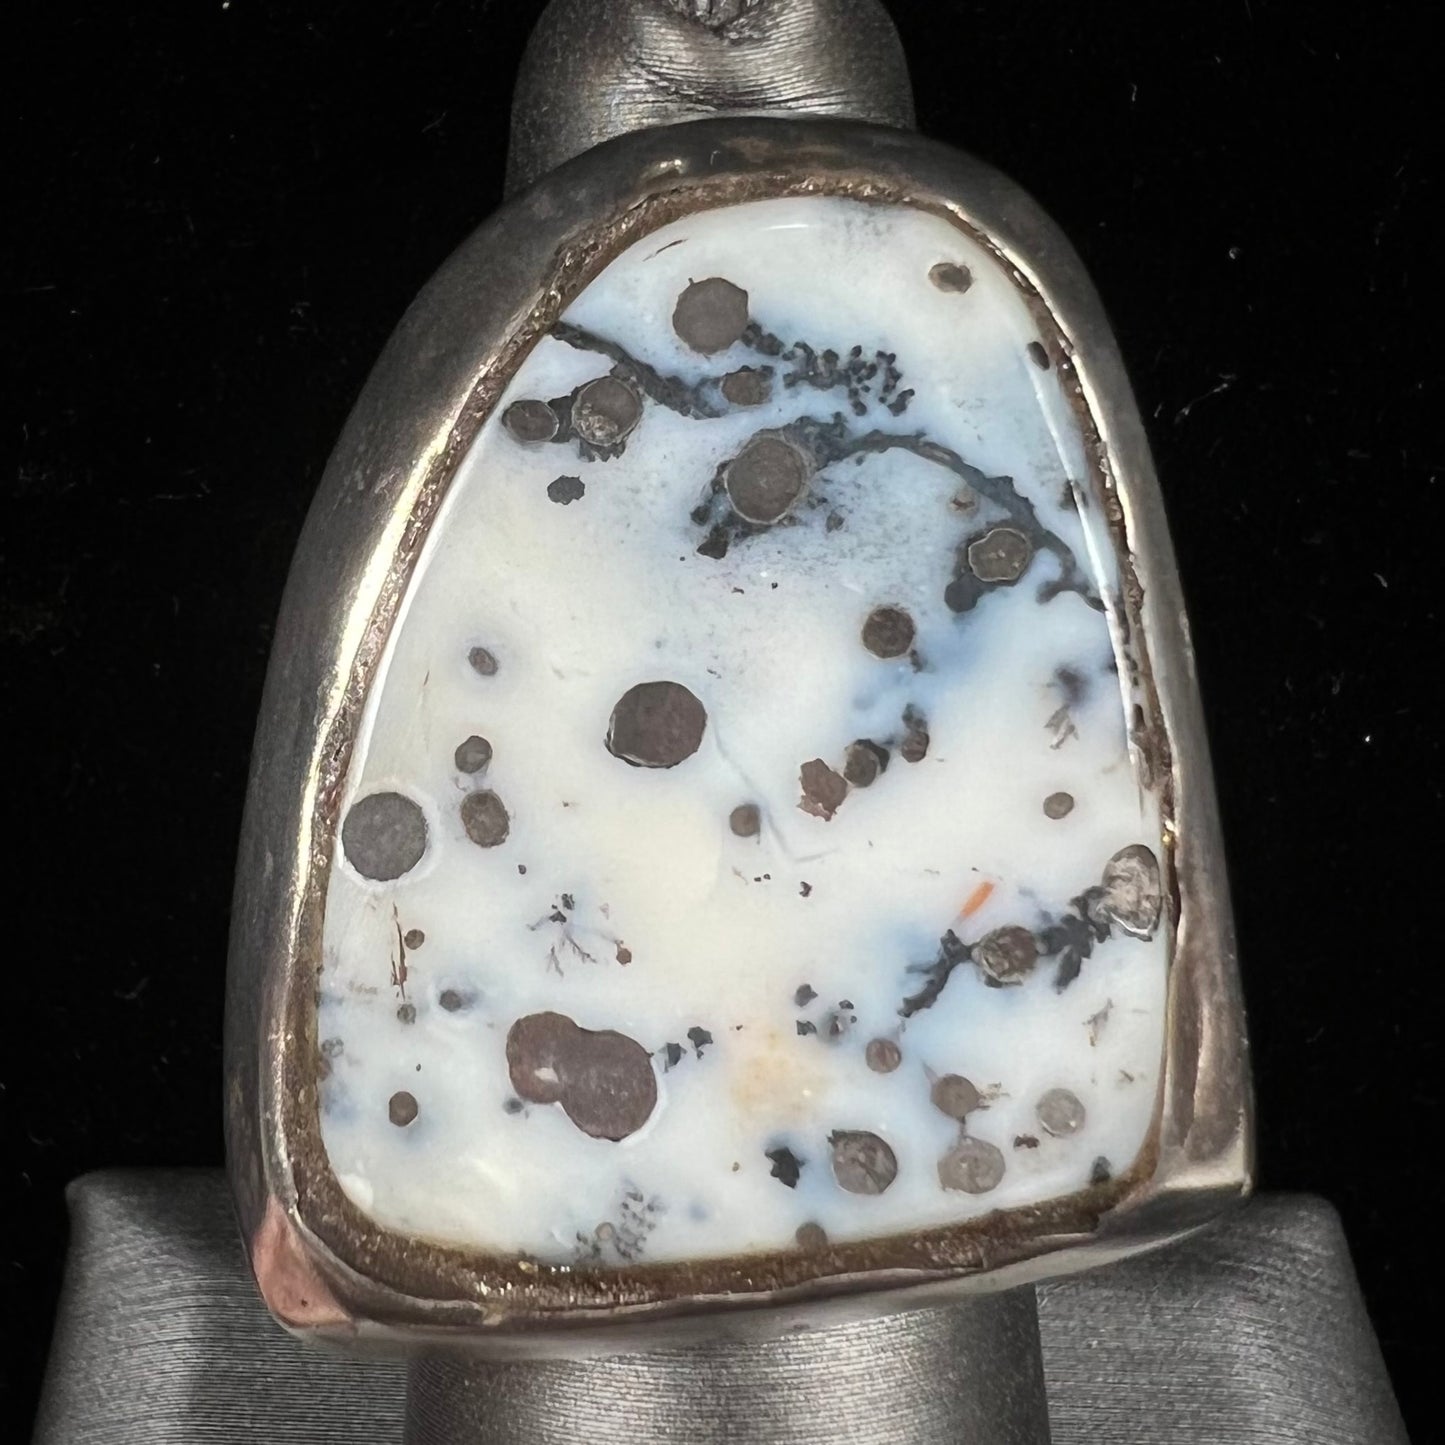 A bezel set ring handmade in sterling silver with a white dendritic agate stone.